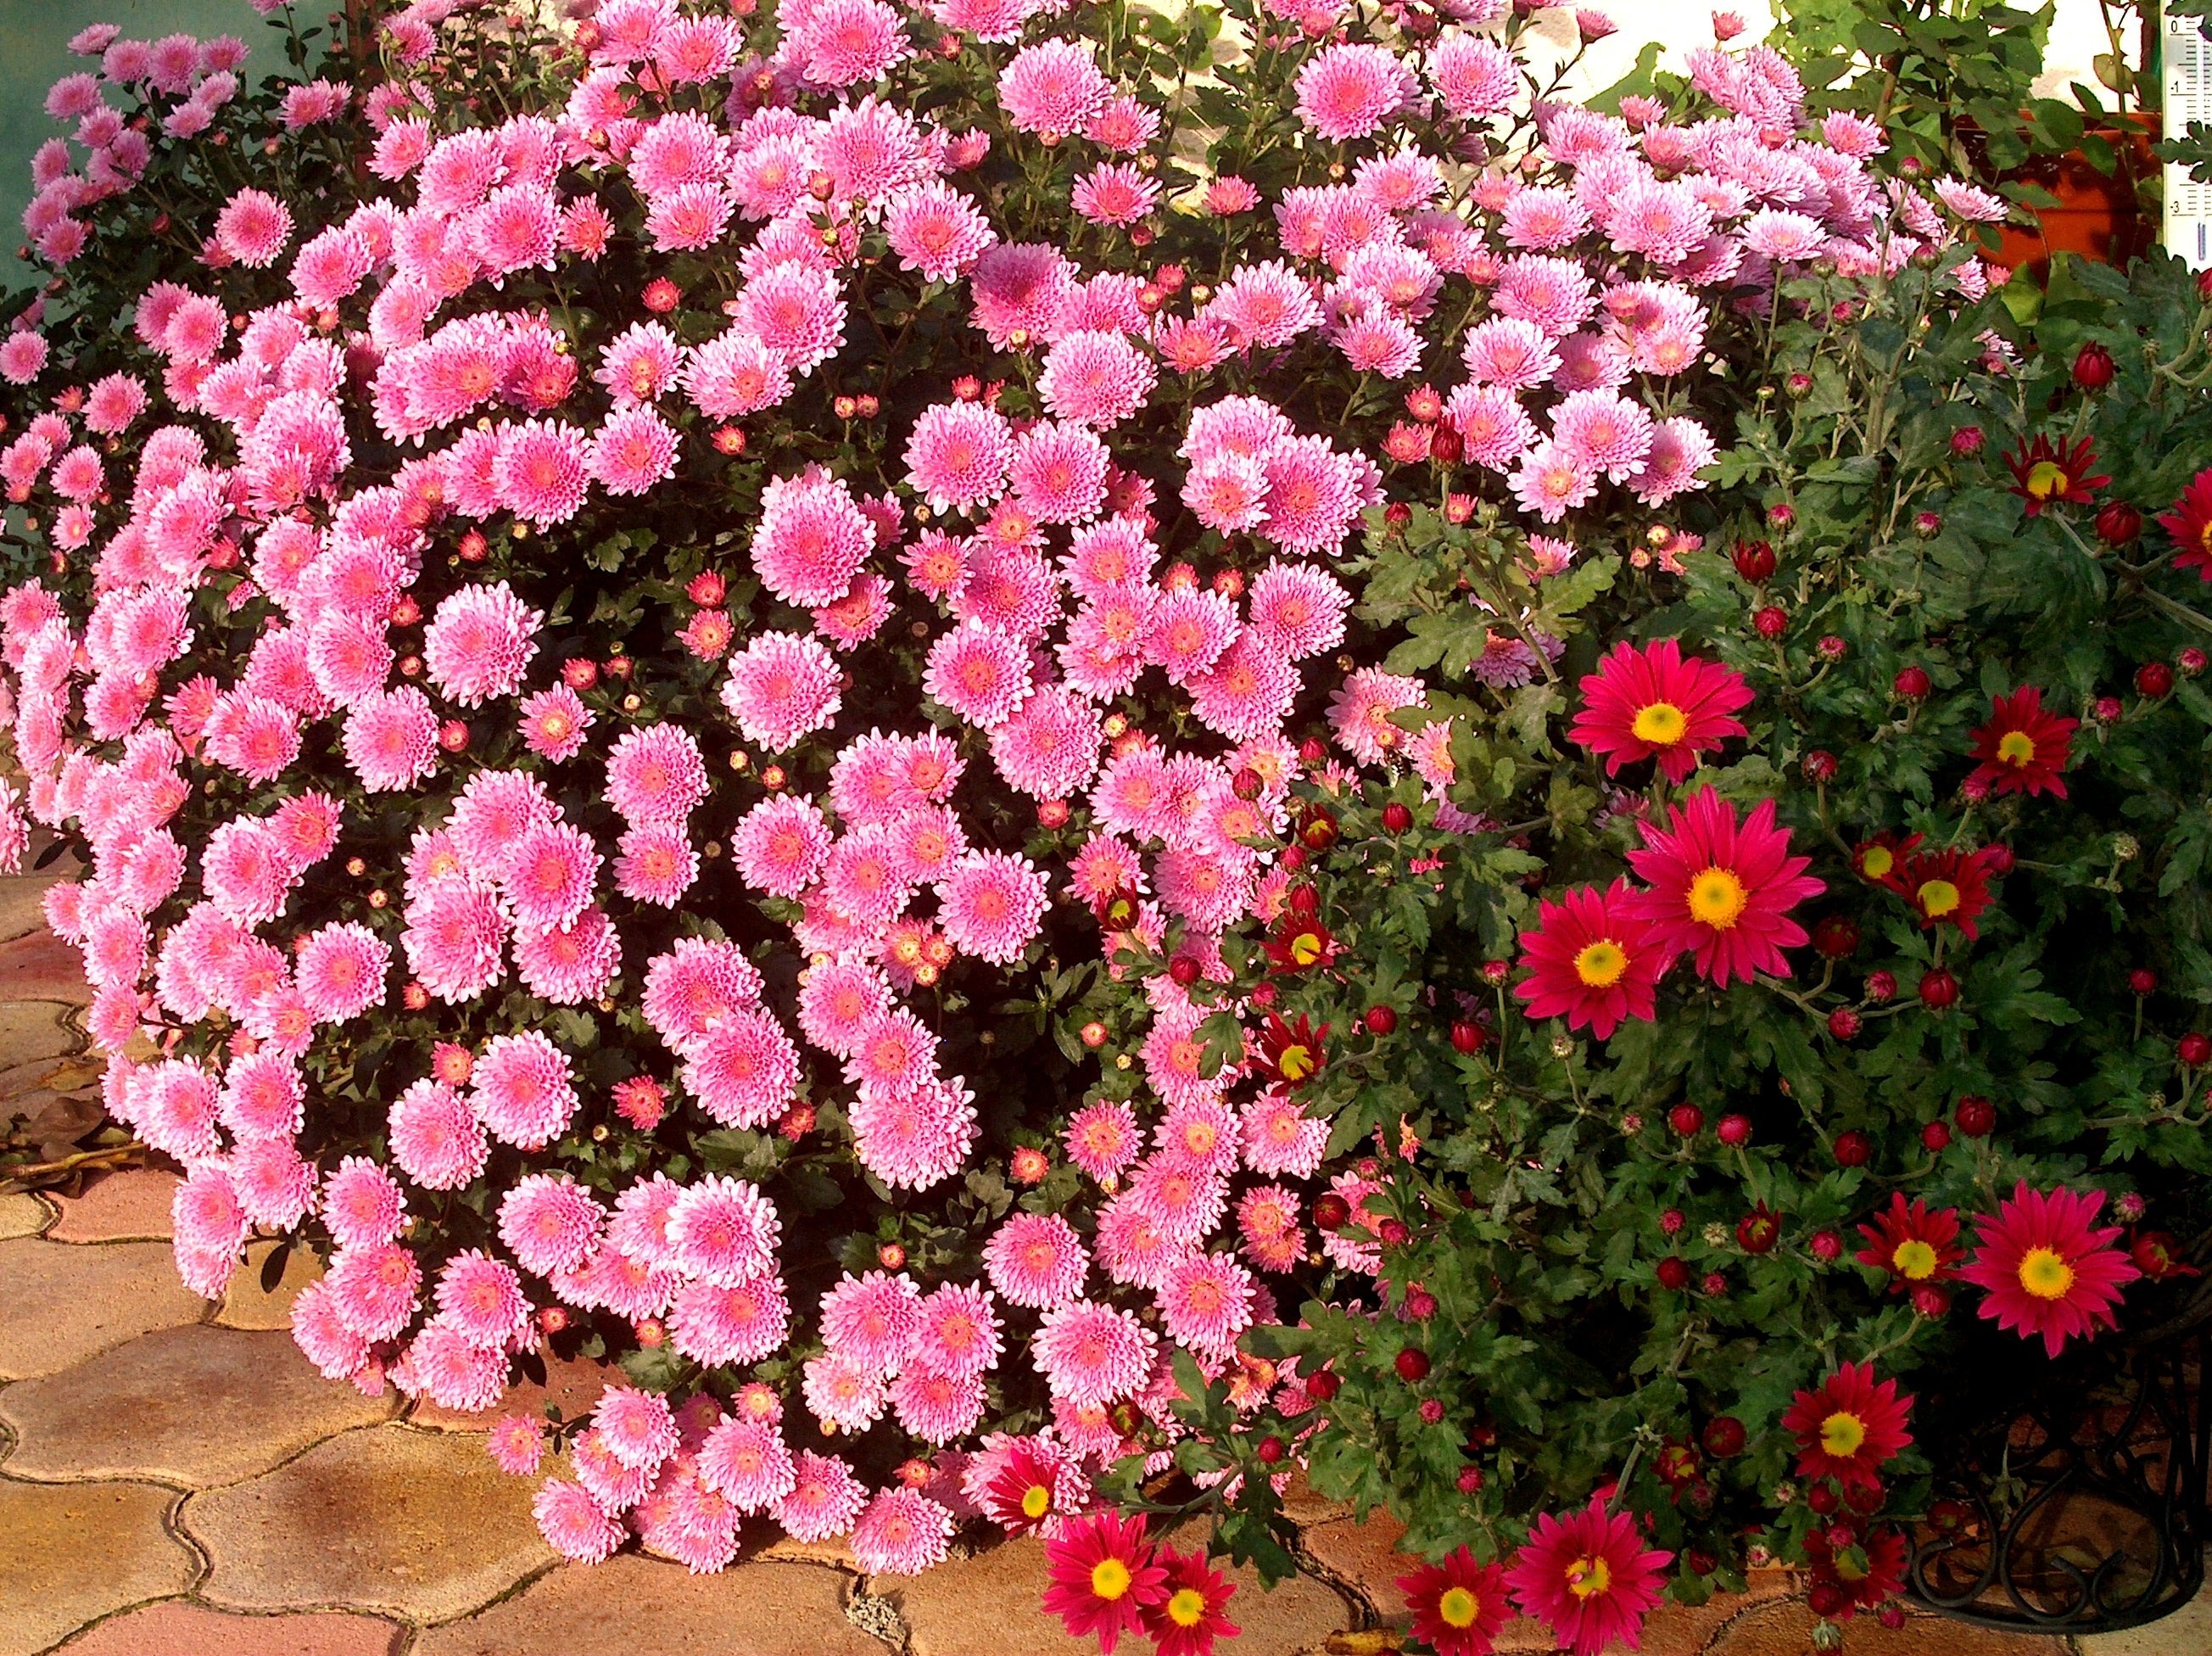 bunch of pink flowers